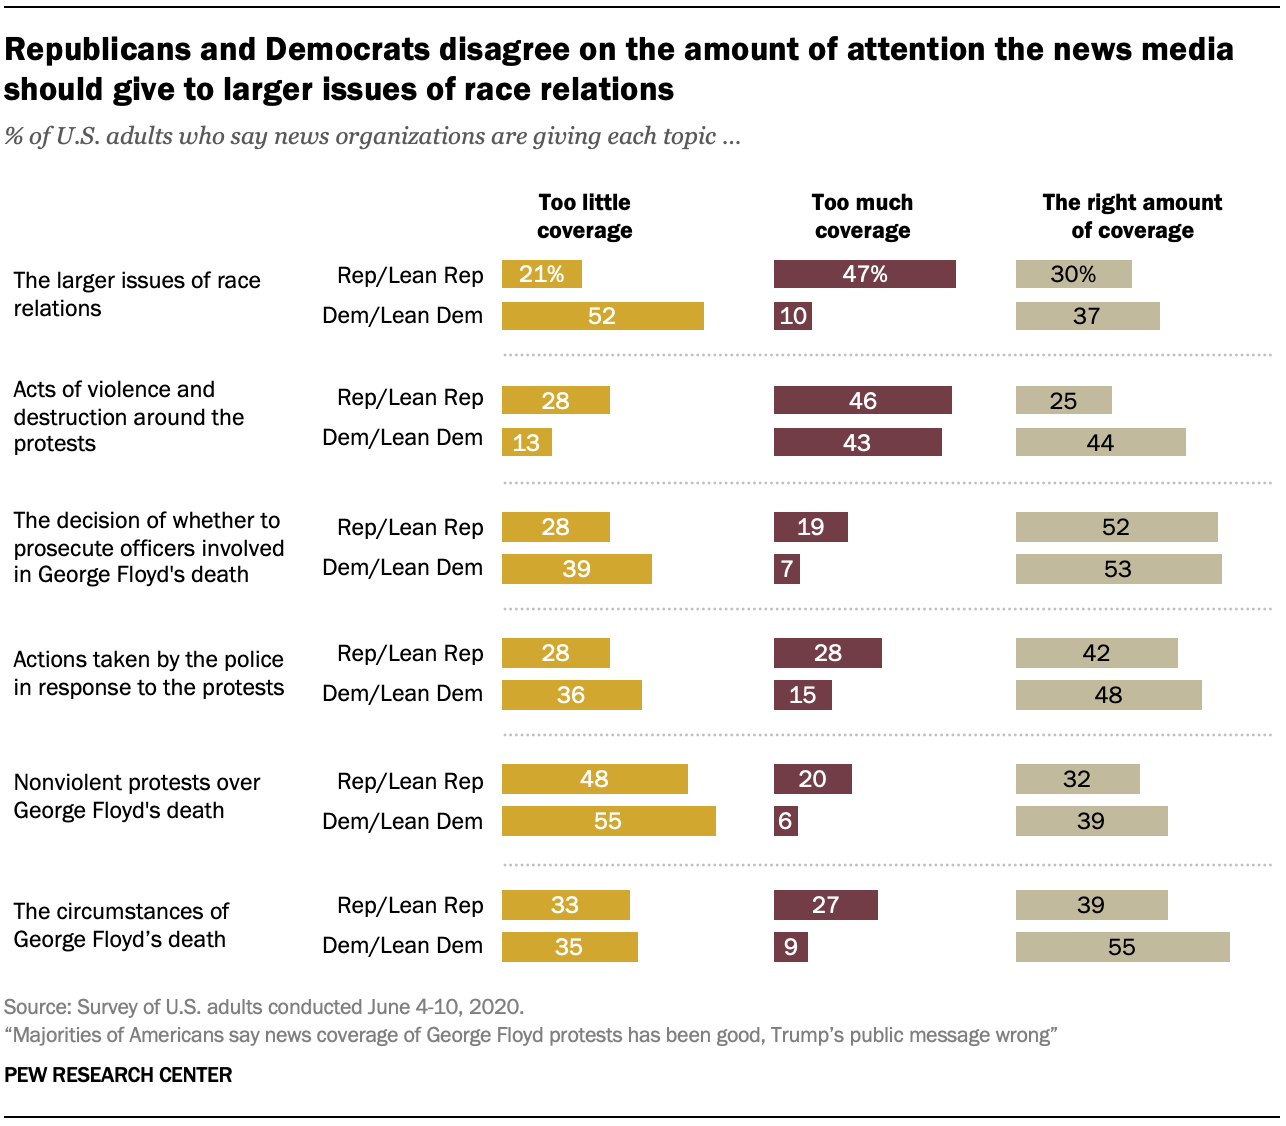 Republicans and Democrats disagree on the amount of attention the news media should give to larger issues of race relations